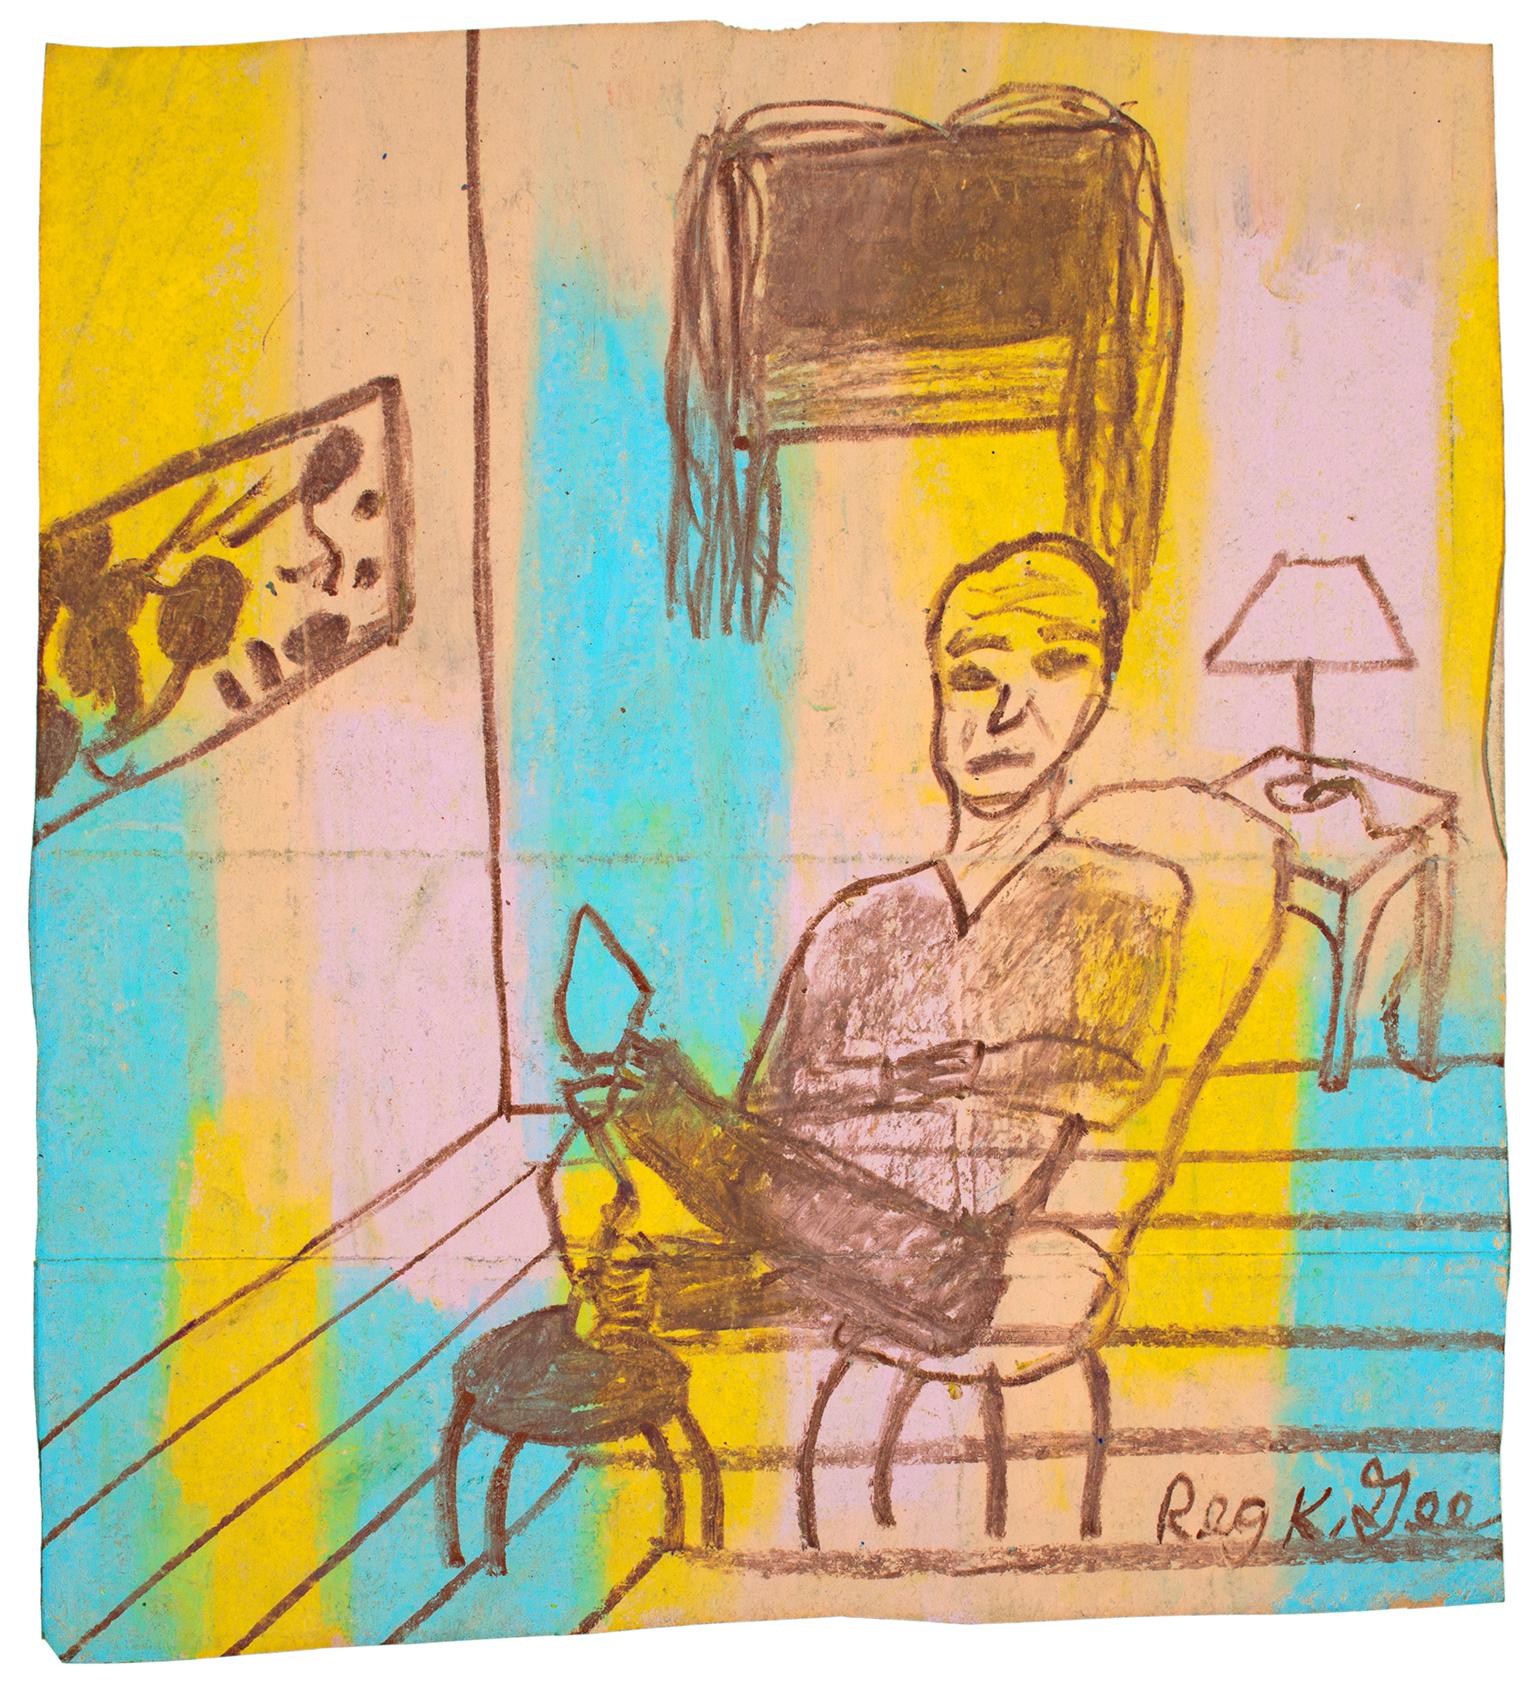 "Accented Room Featuring a Man," Oil Pastel on Grocery Bag by Reginald K. Gee